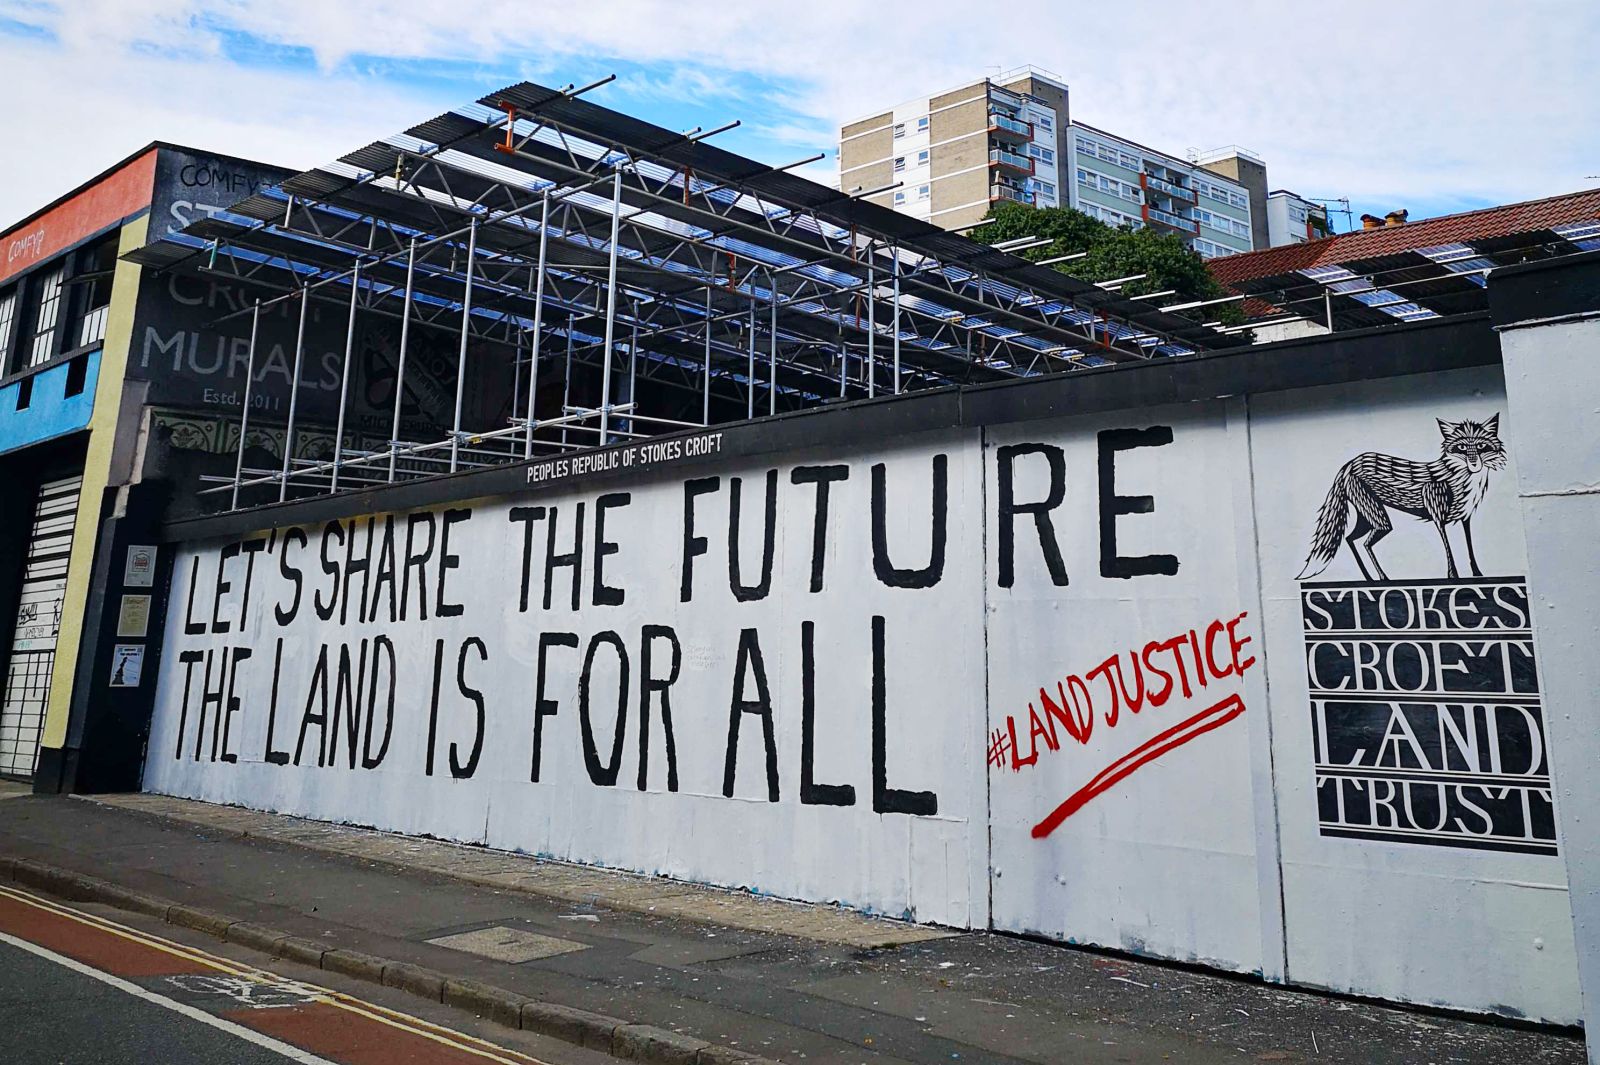 SCLT Mural wall - Land Justice